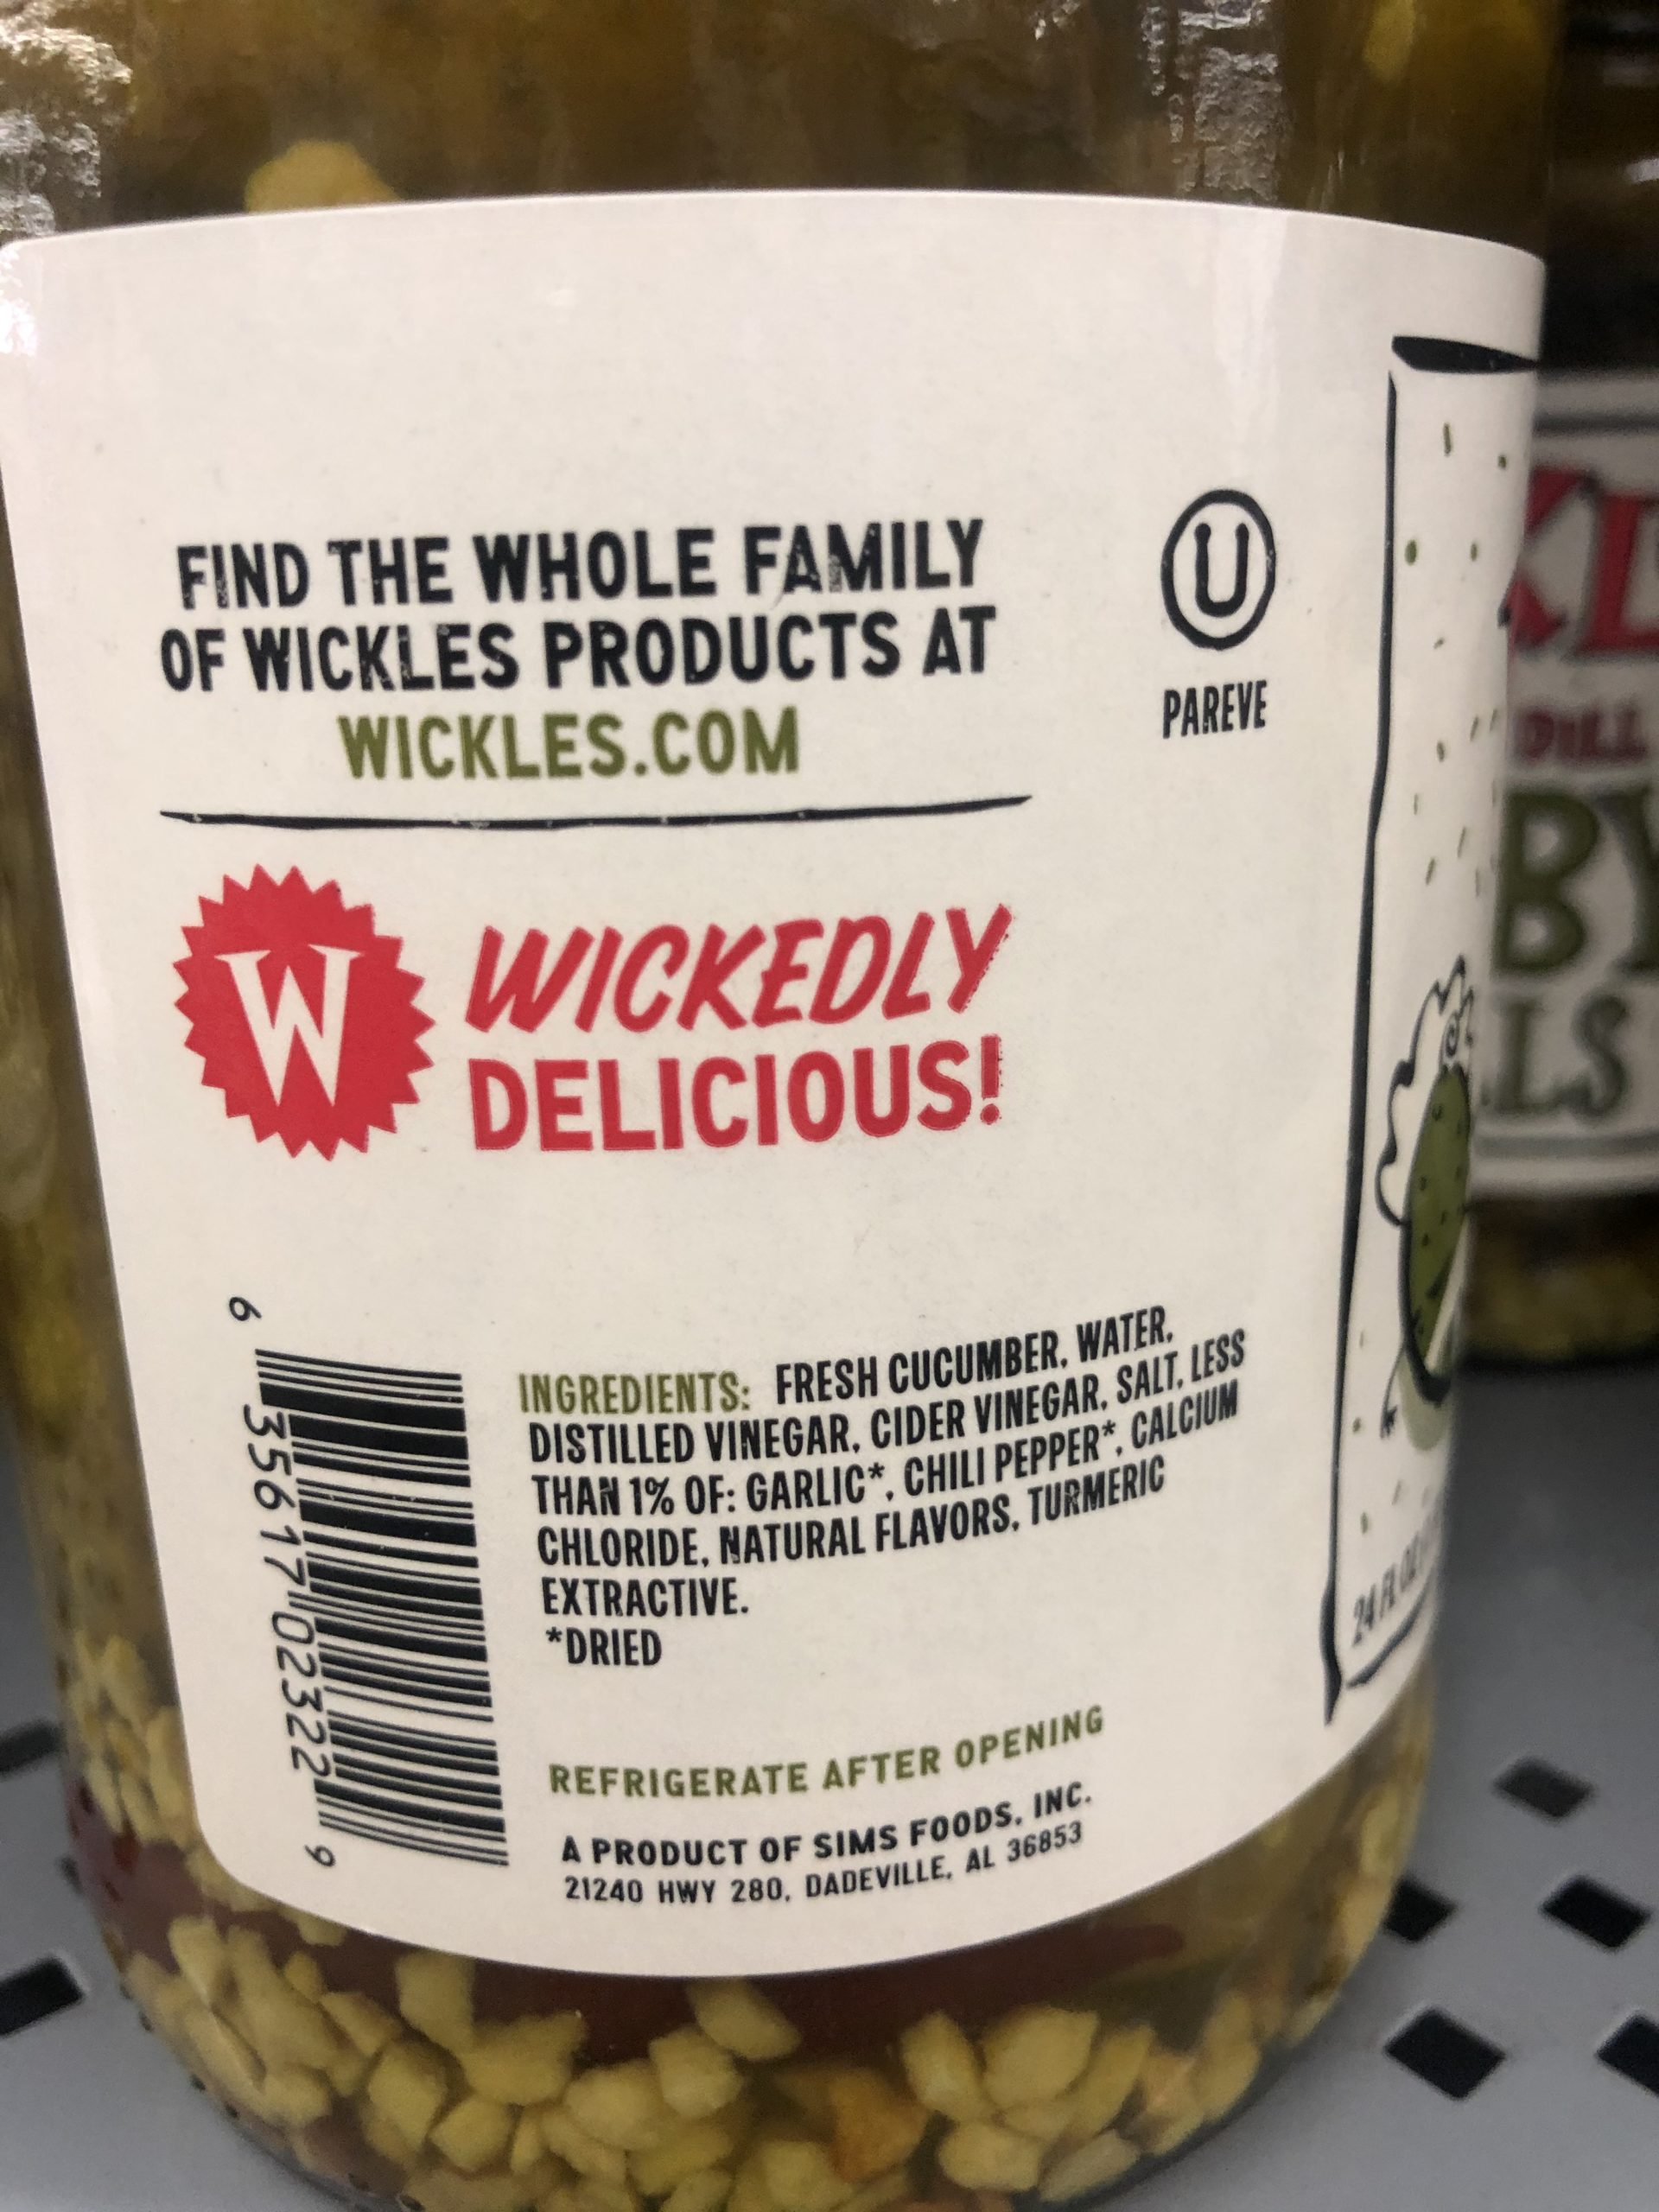 Wickles Pickles Wickles Dirty Dill Pickle Spears, 24 Oz.